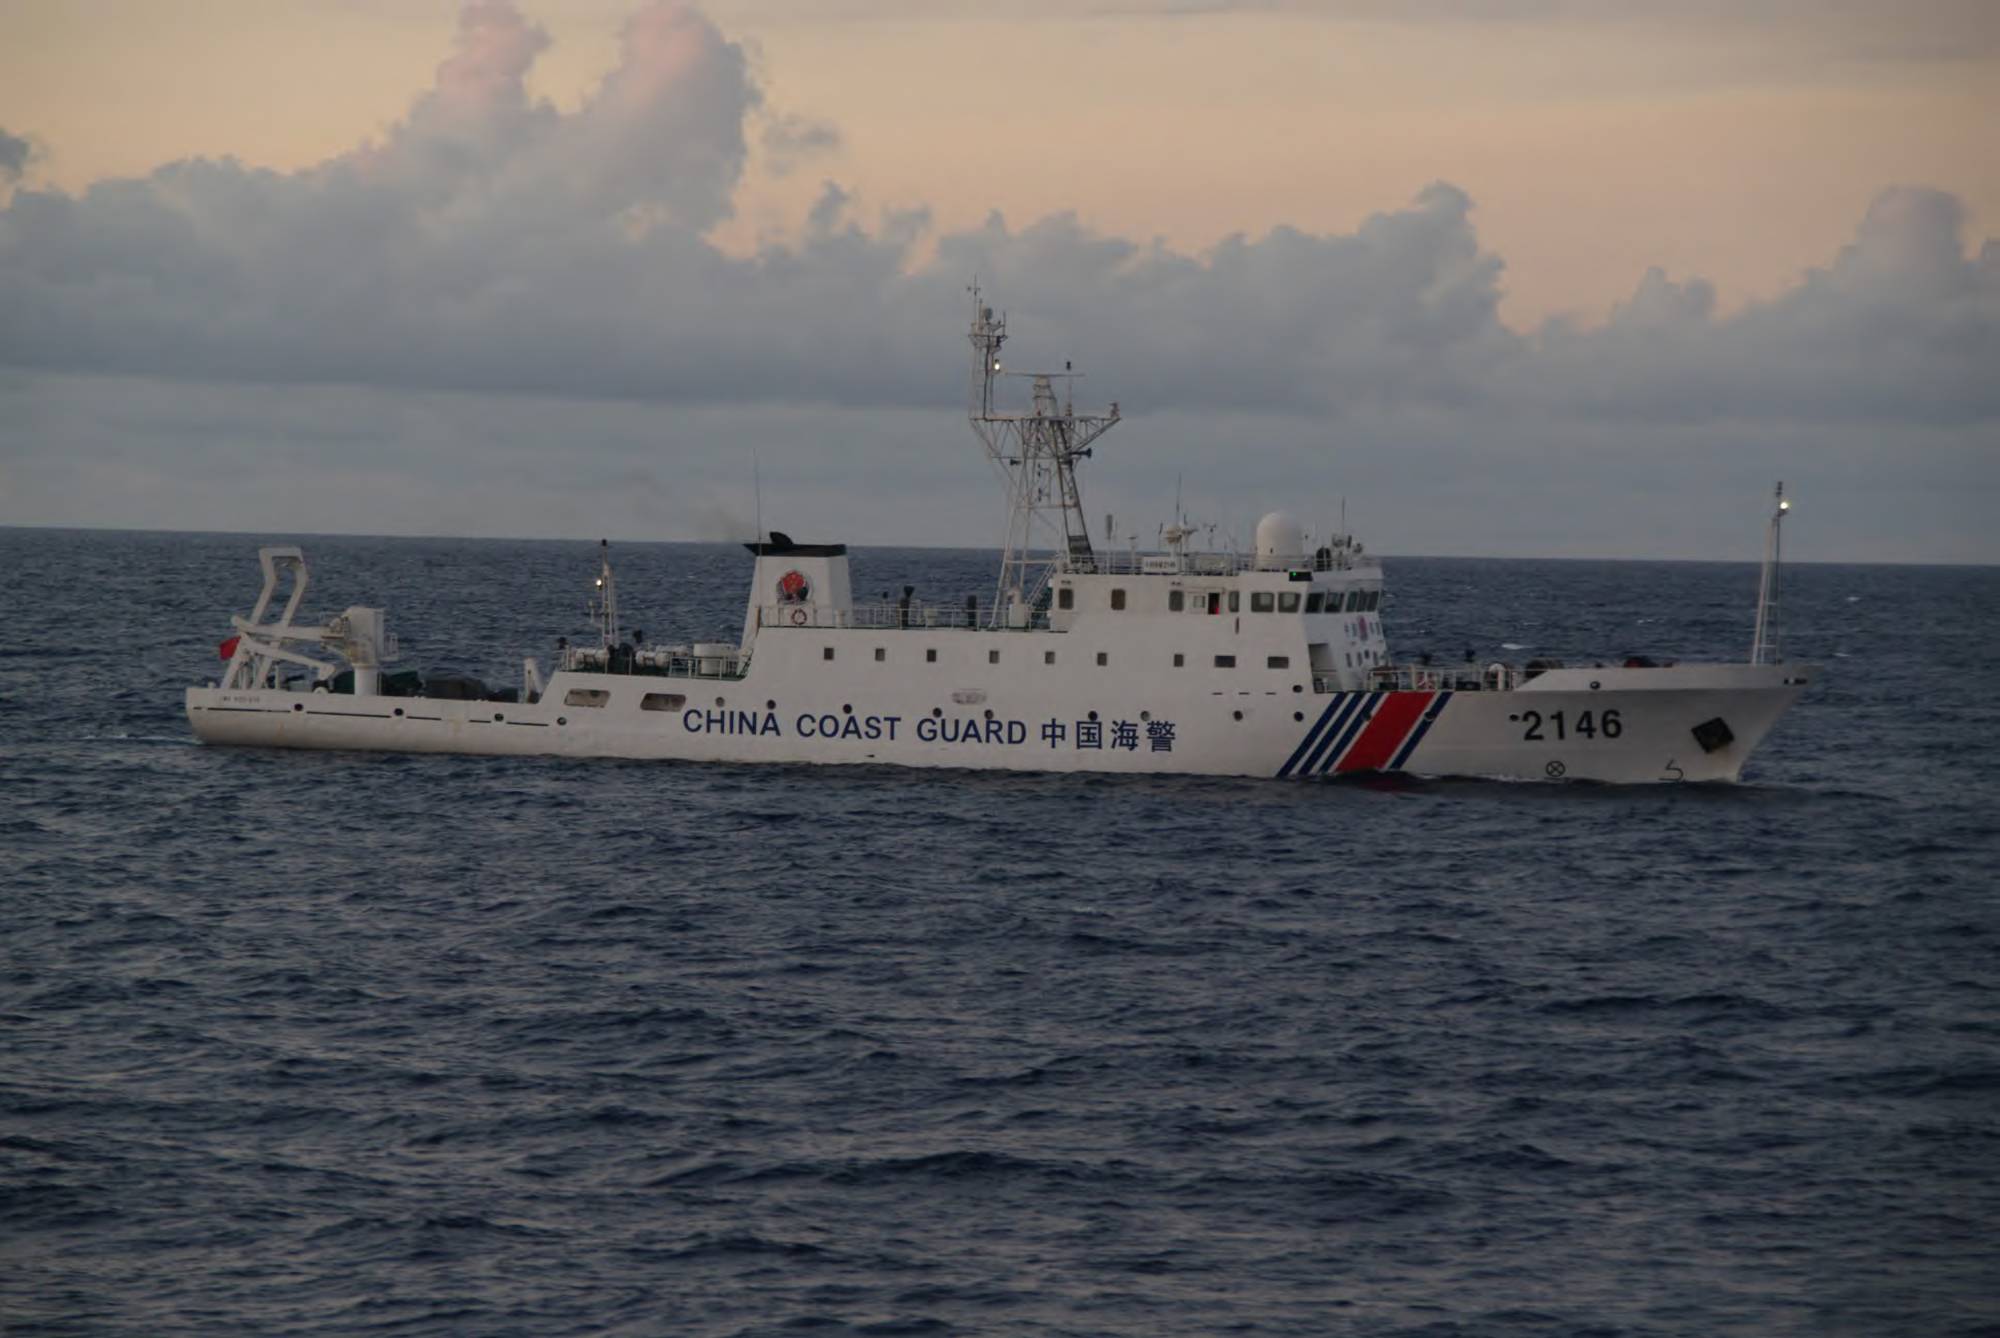 A China Coast Guard vessel sails in the East China Sea near the disputed Senkaku Islands in this file photo from August 2013.   | JAPAN COAST GUARD / VIA REUTERS